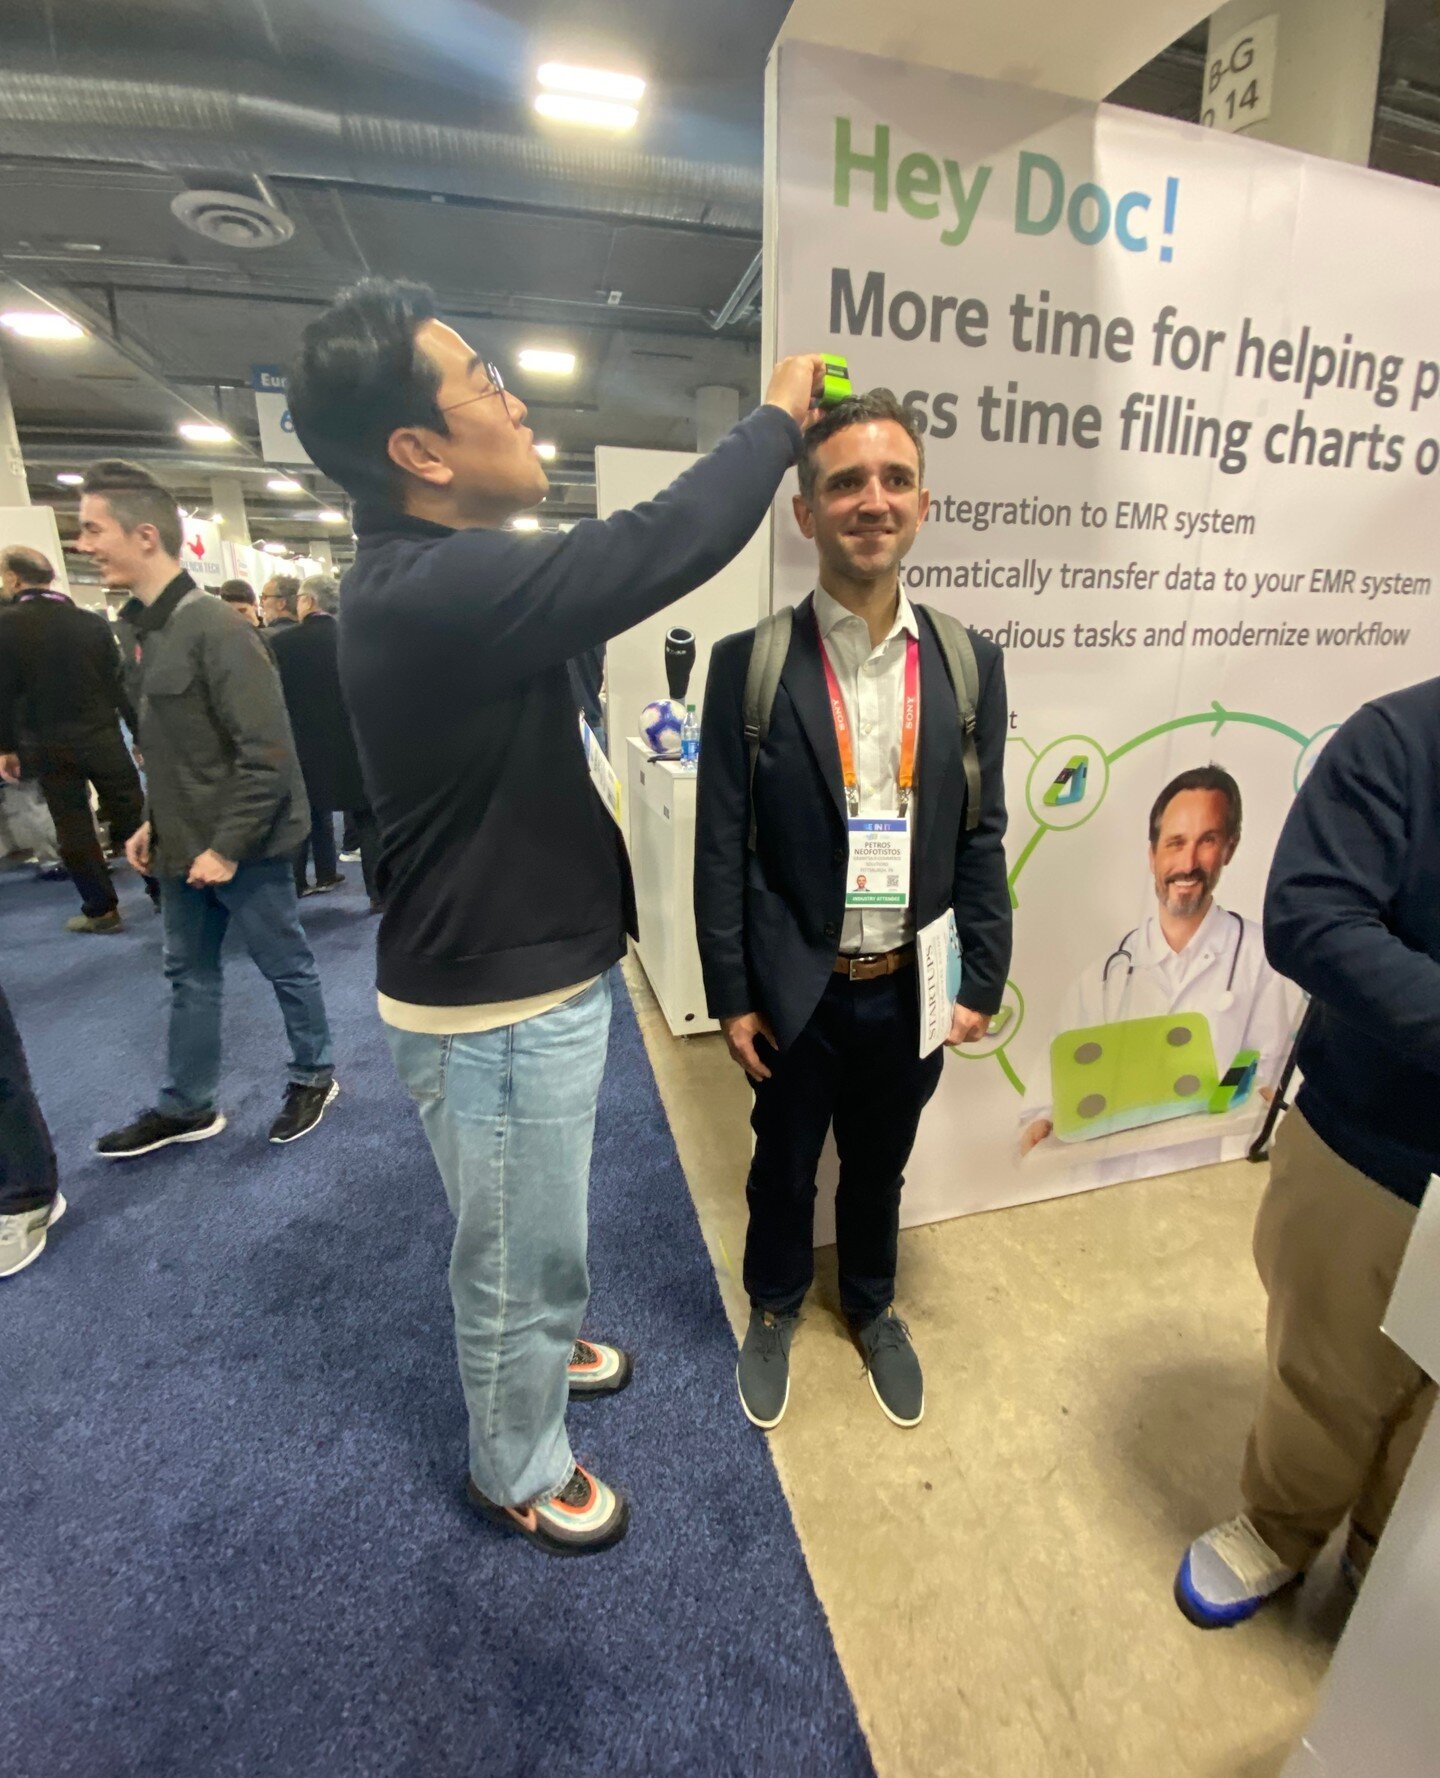 Petros got some hands-on experience with new tech at CES this year! Excited to see these new products hit the market soon!⁠
⁠
#ces #ces2023 #ecommerce #amazon